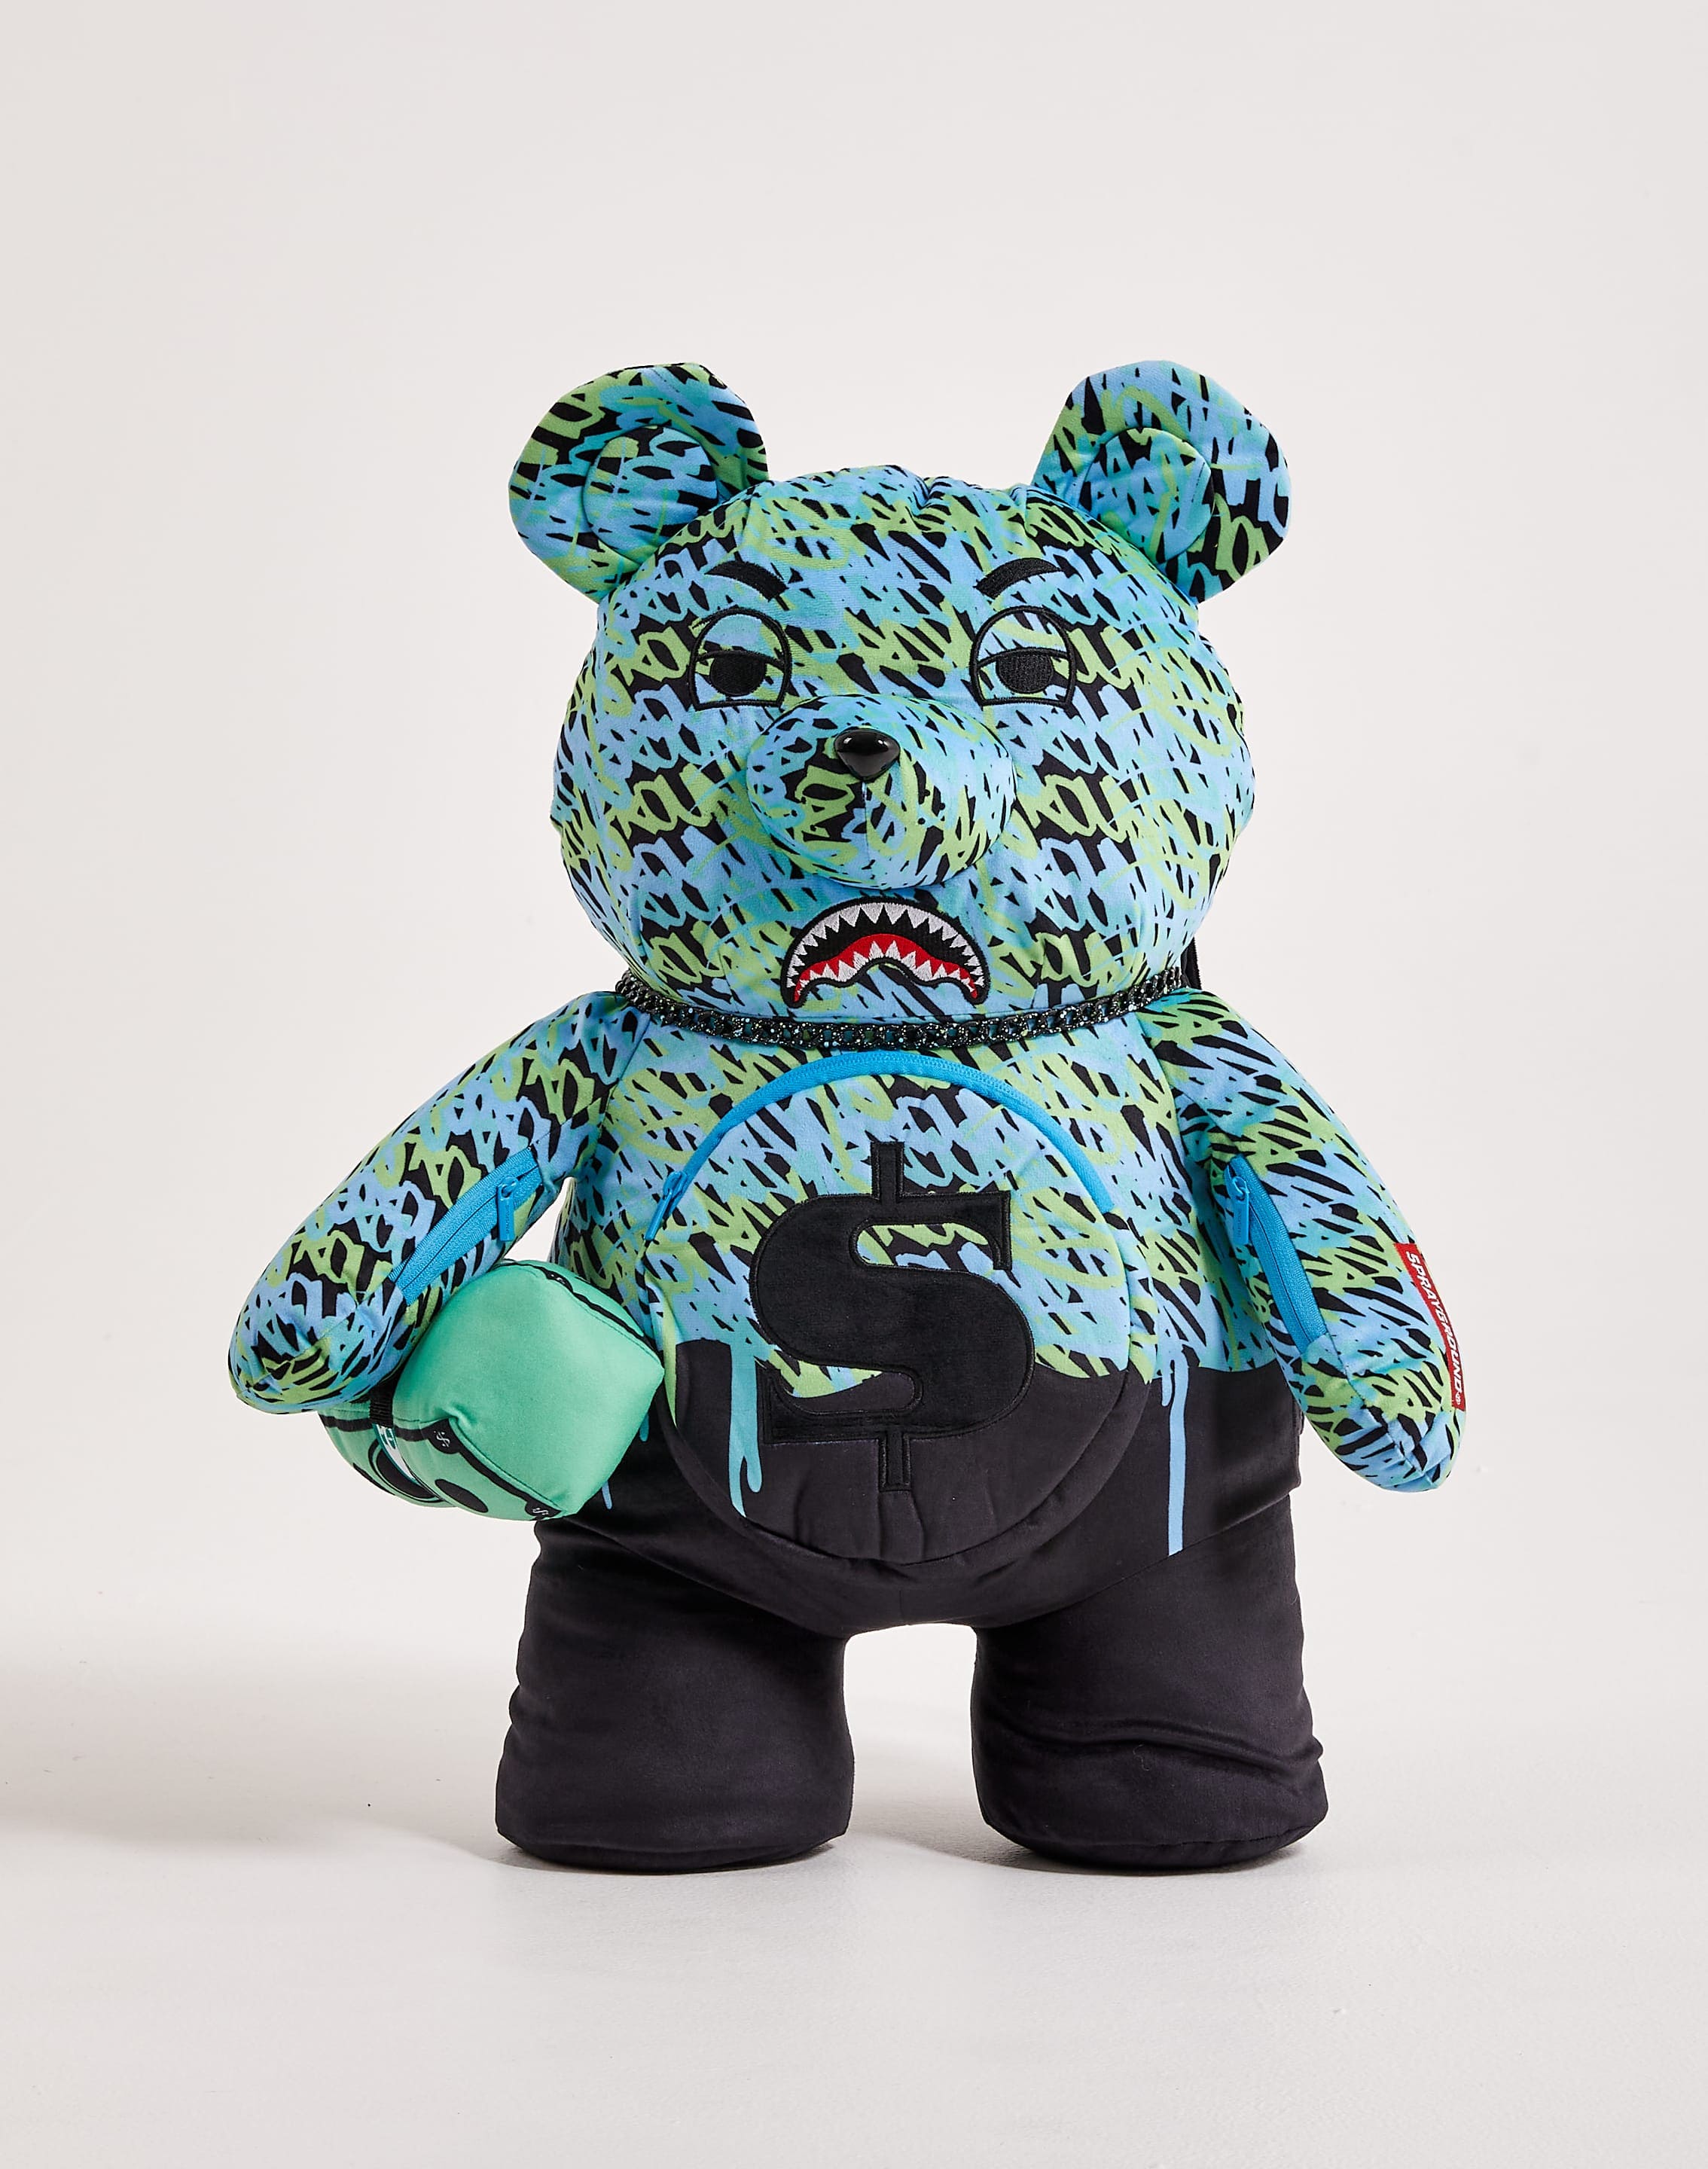 Would you pay over $14,000 for a Mickey Mouse Bearbrick? Swipe